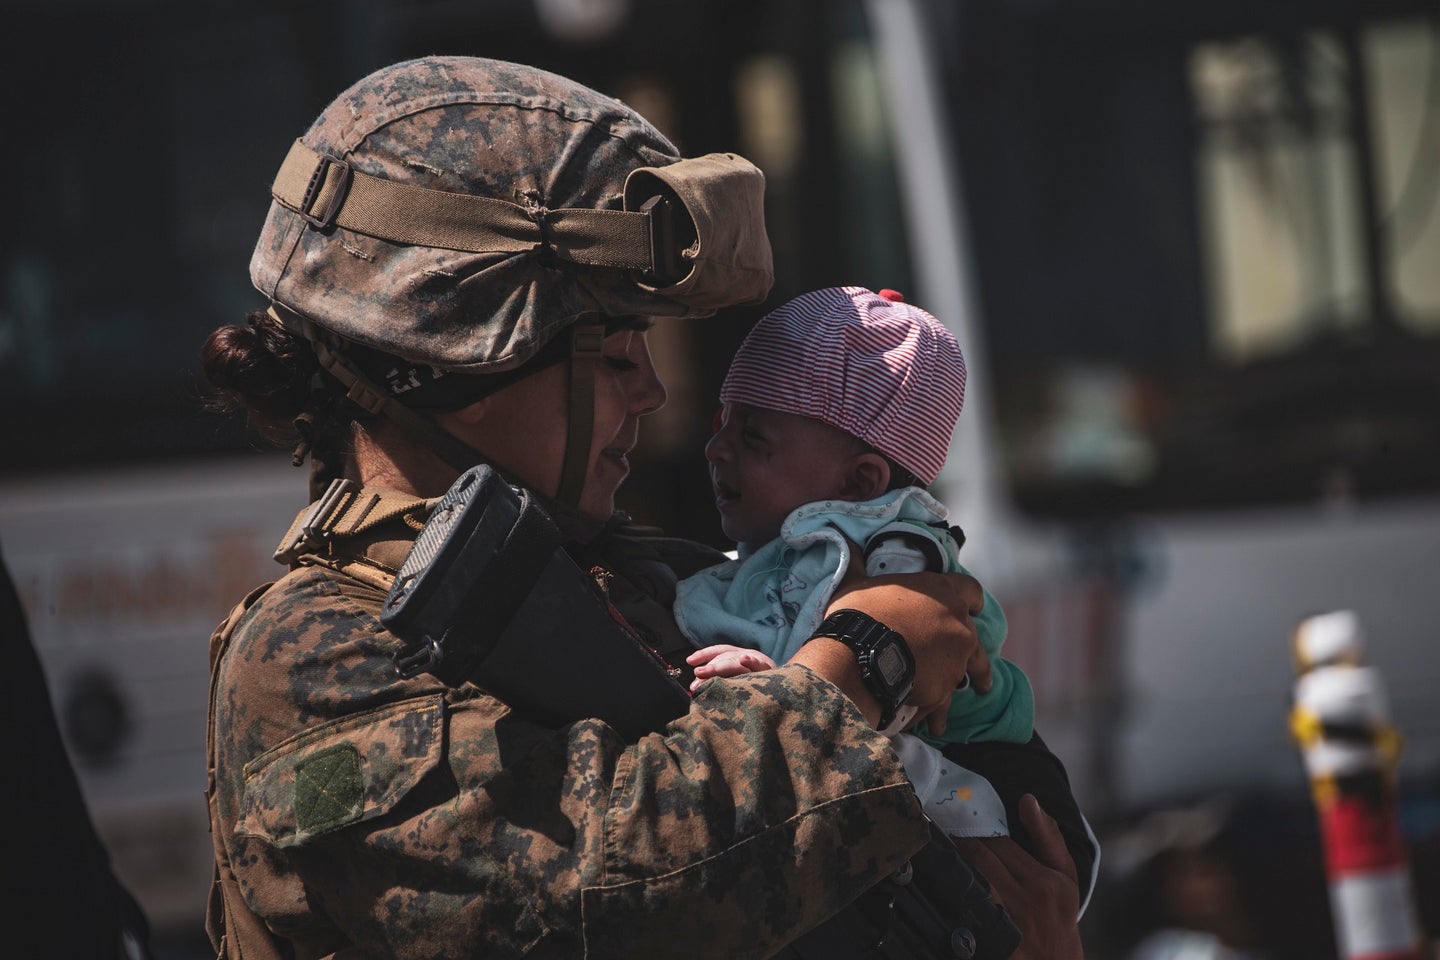 A Marine assigned to the 24th Marine Expeditionary Unit calms down an infant at Hamid Karzai International Airport, Afghanistan, on Aug. 28. (Cpl. Davis Harris/U.S. Marine Corps.)